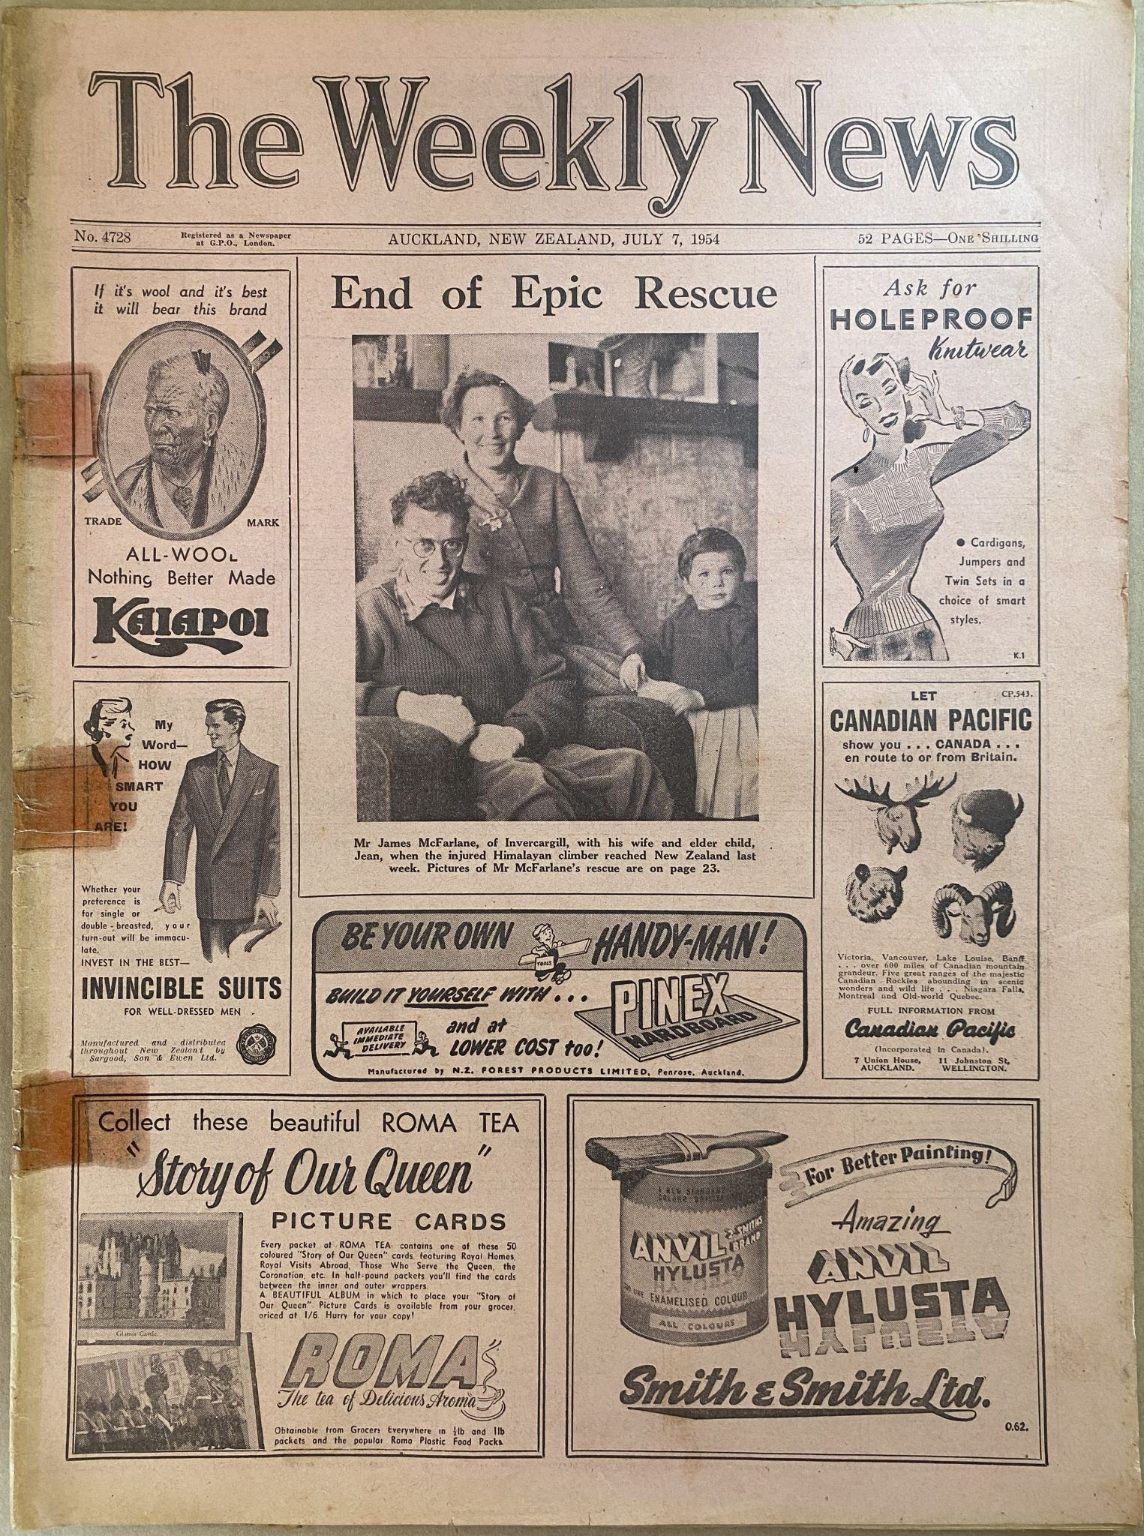 OLD NEWSPAPER: The Weekly News - No. 4728, 7 July 1954